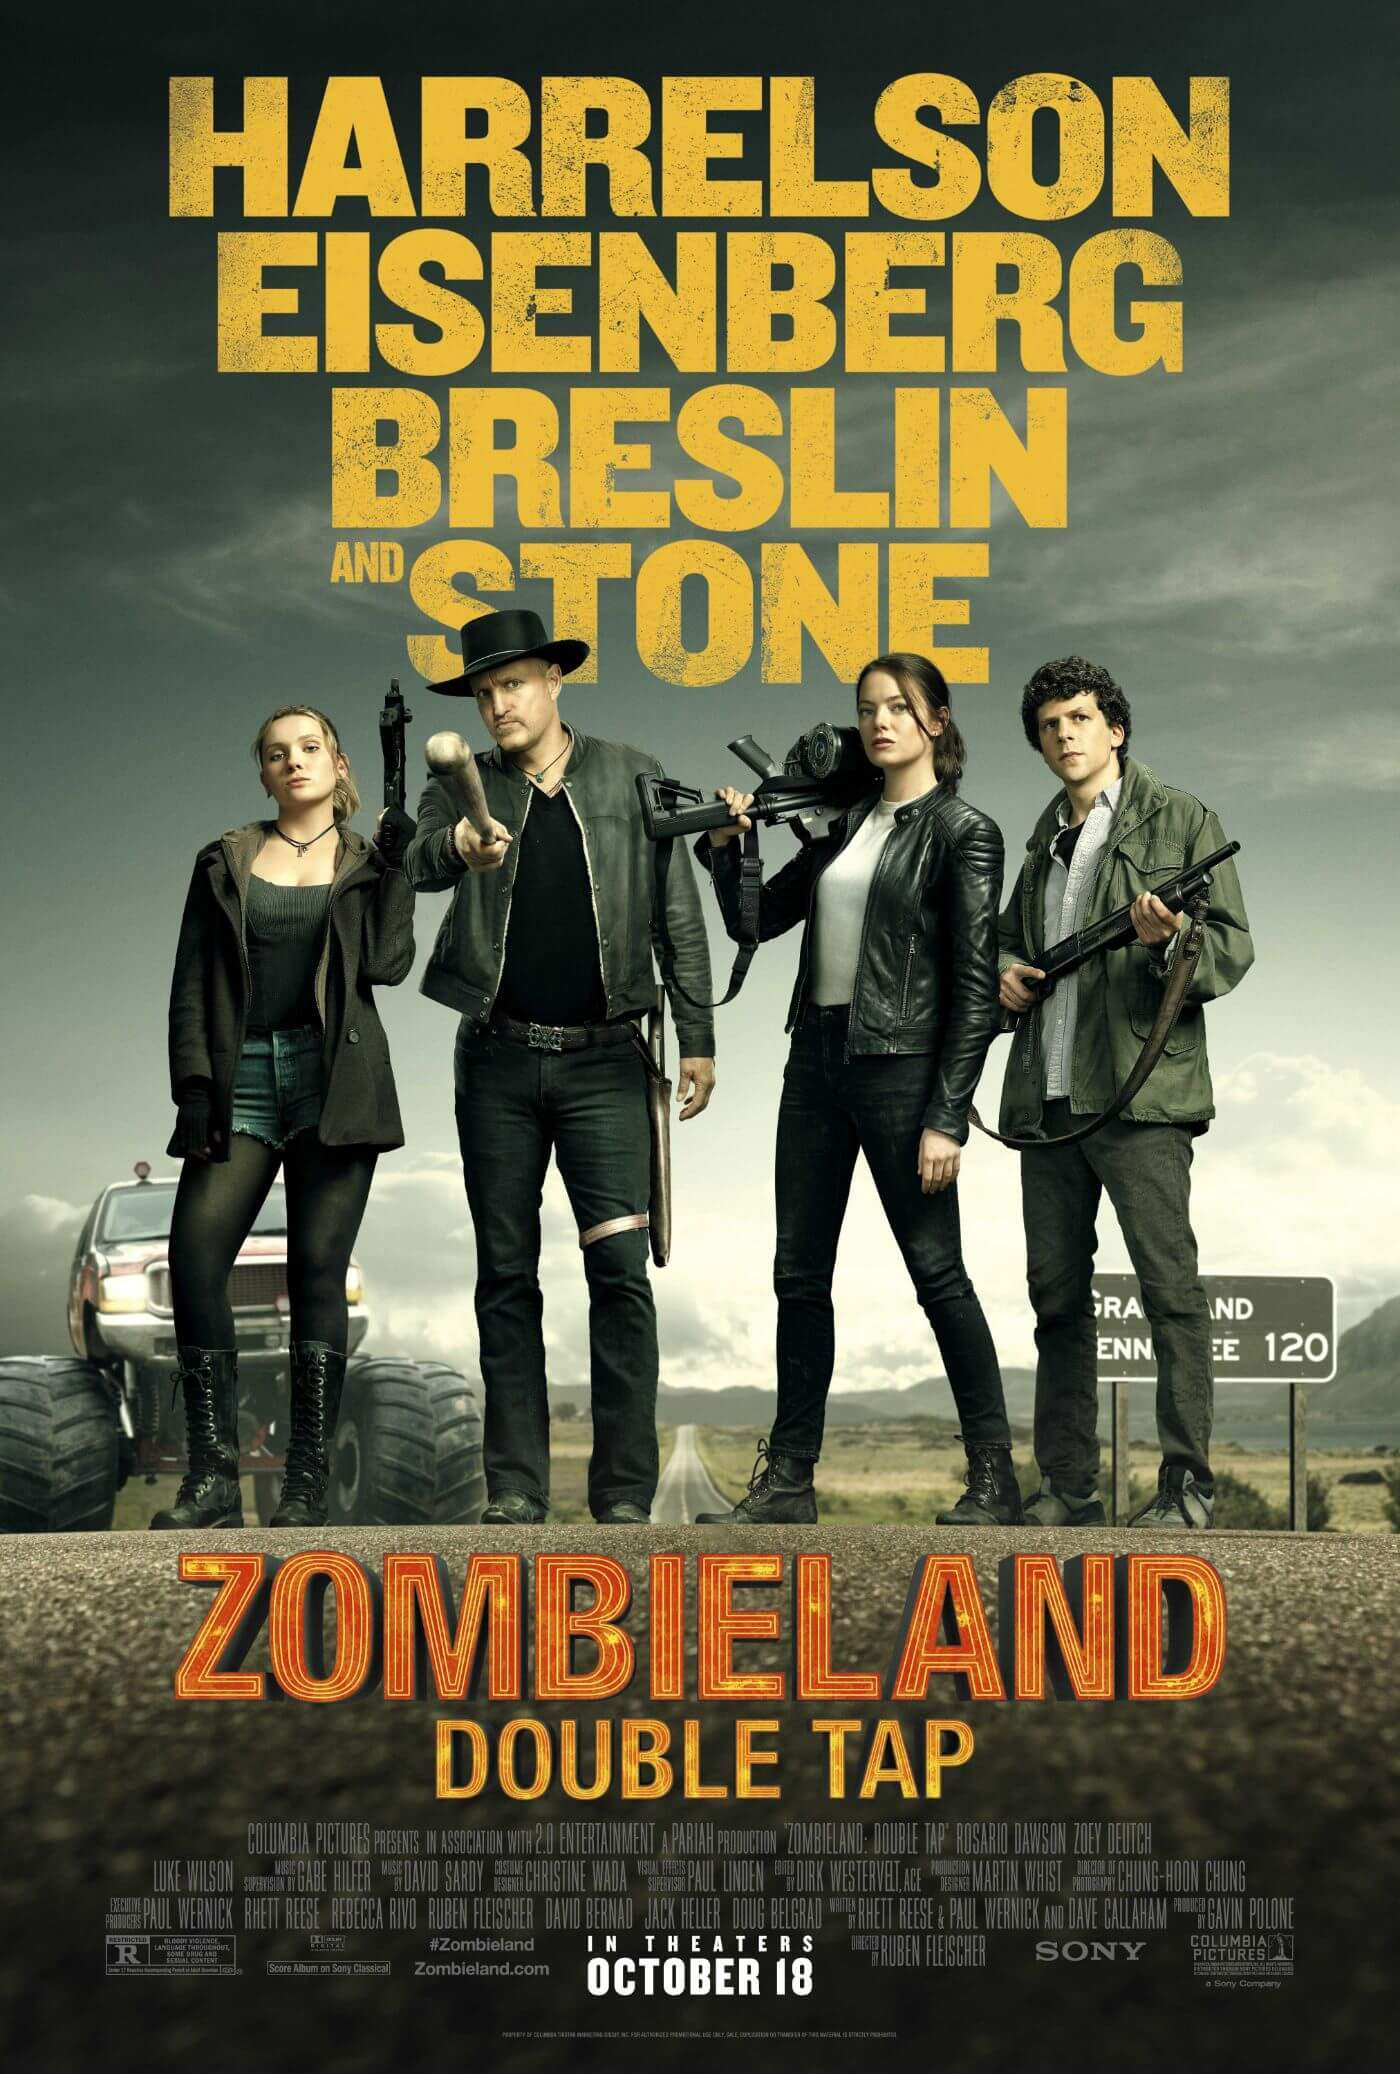 Zombieland Double Tap Woody Harrelson Hollywood Action Movie Poster Life Size Posters By Kaiden Thompson Buy Posters Frames Canvas Digital Art Prints Small Compact Medium And Large Variants